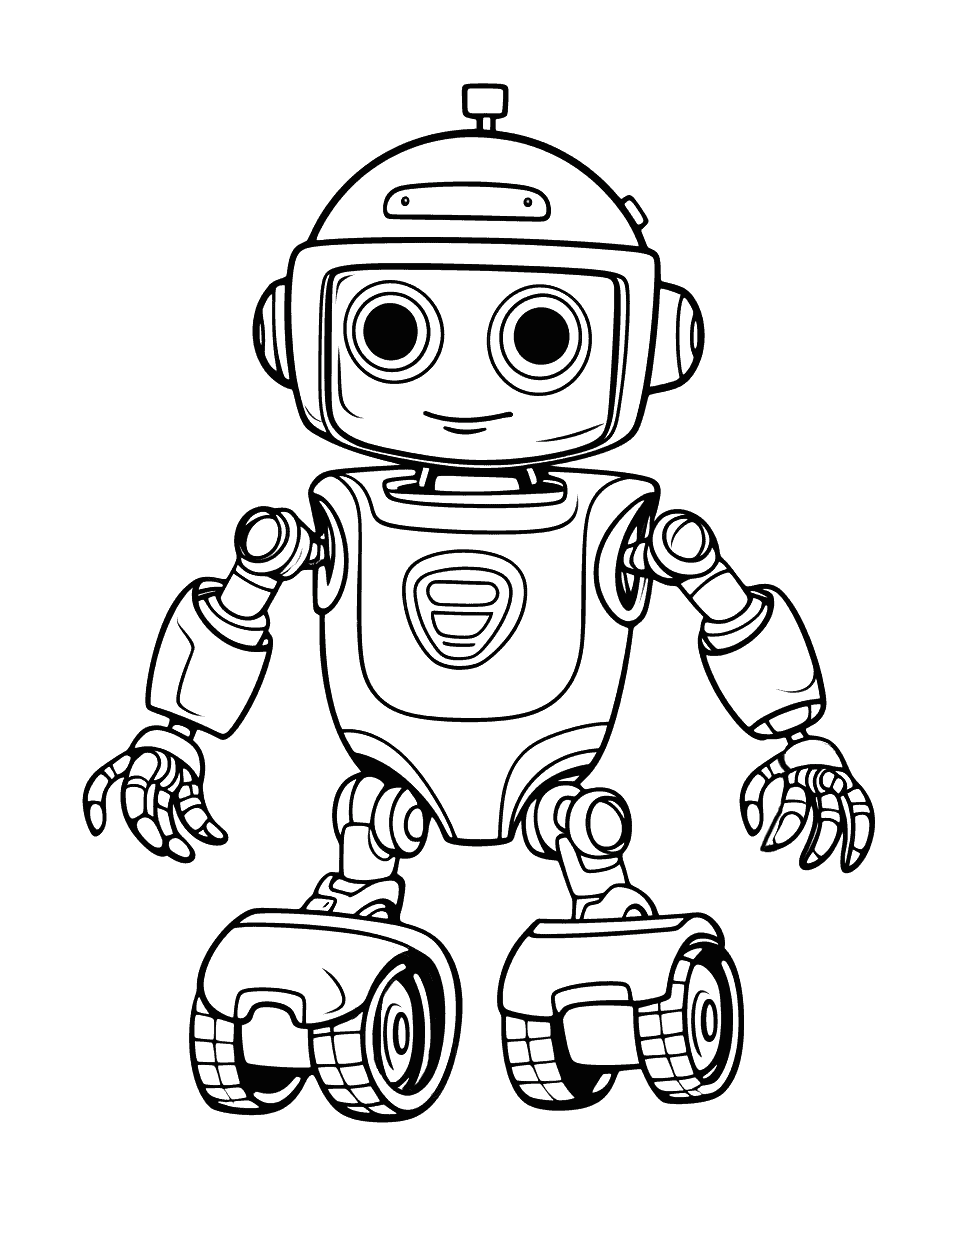 Cool Robot Skater Coloring Page - A robot on built-in roller skates ready to skate.